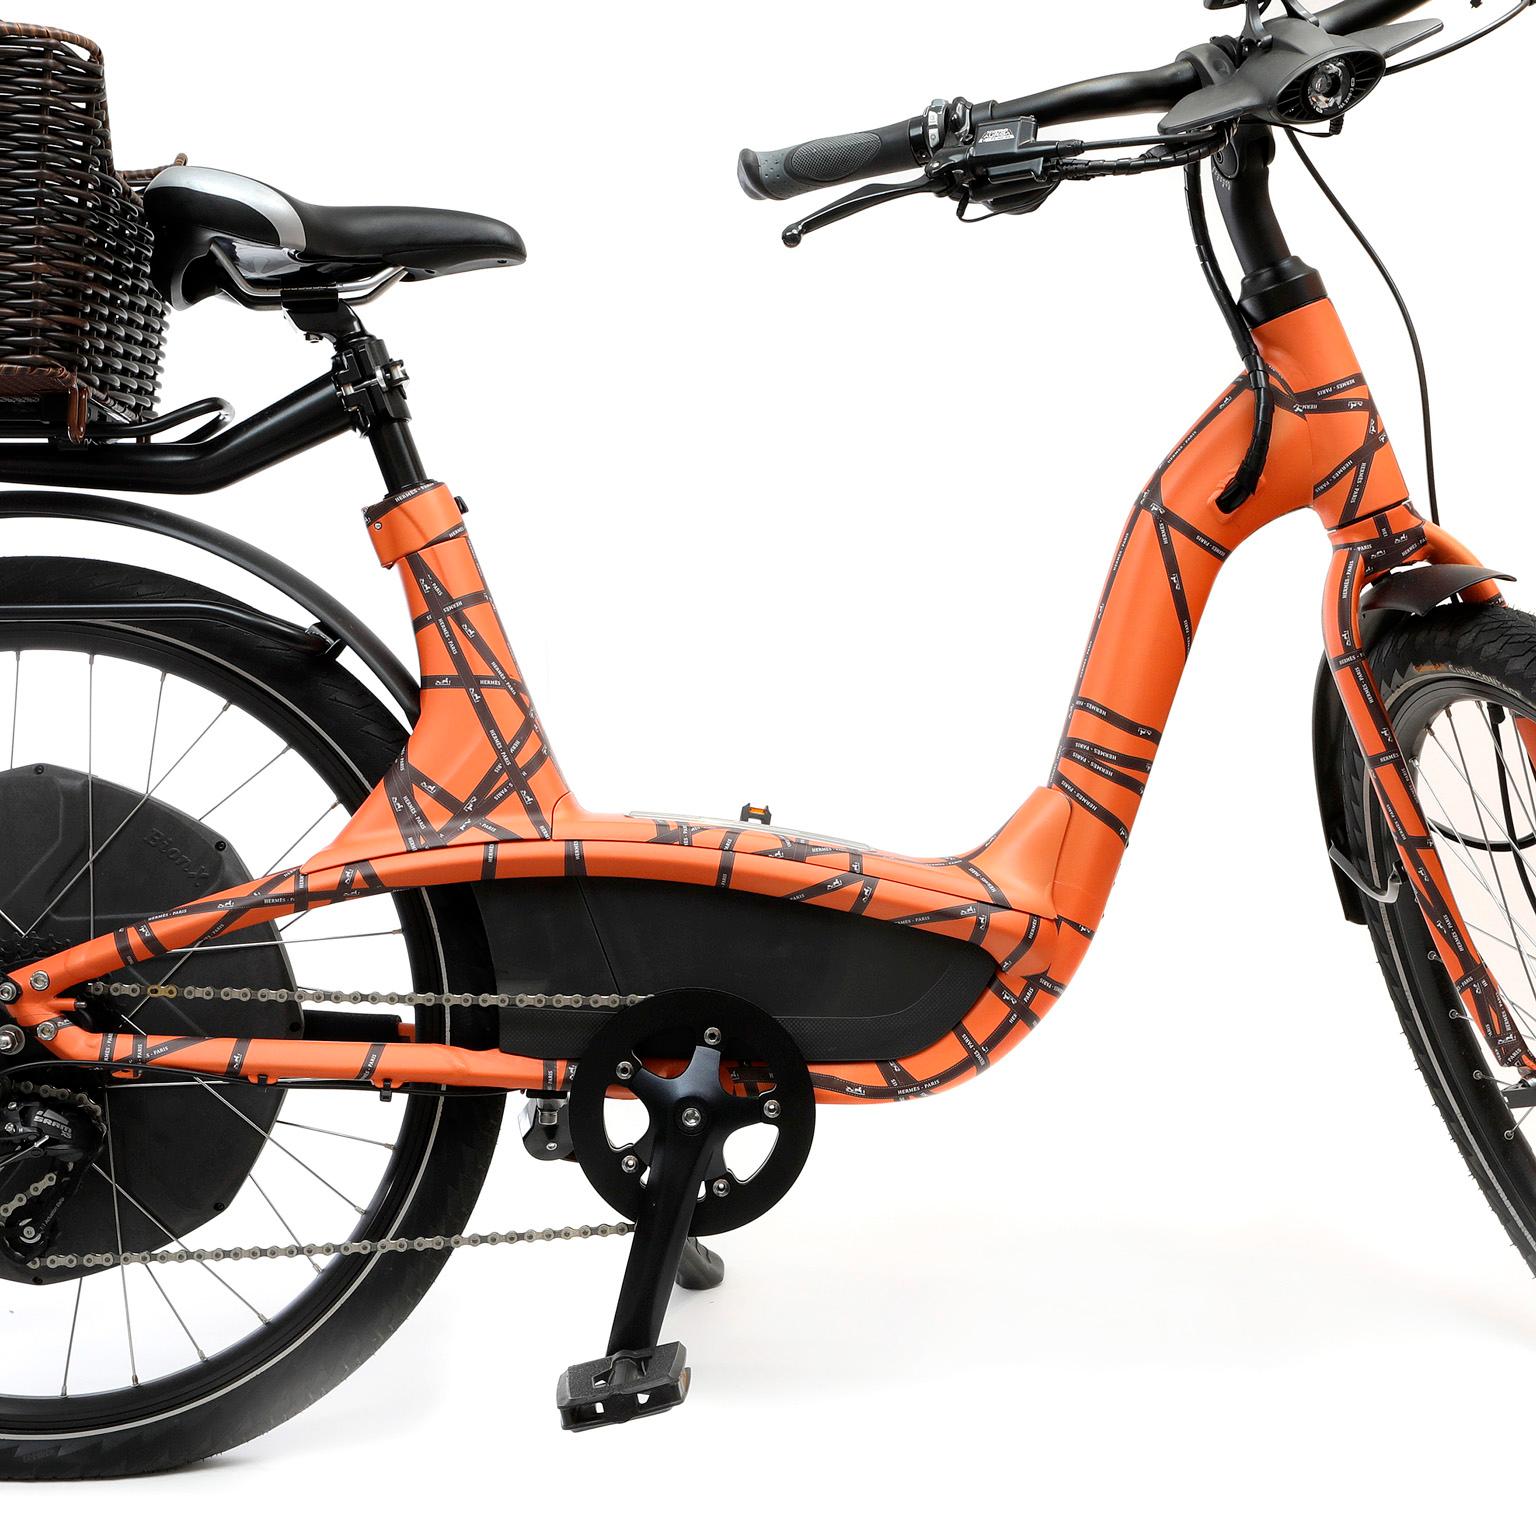 This authentic Hermès Electric Bike is in mint condition.  Orange frame with signature Hermès ribbon pattern.  Charming straw basket sits jauntily on the rear to carry the essentials. 
PBF 12236